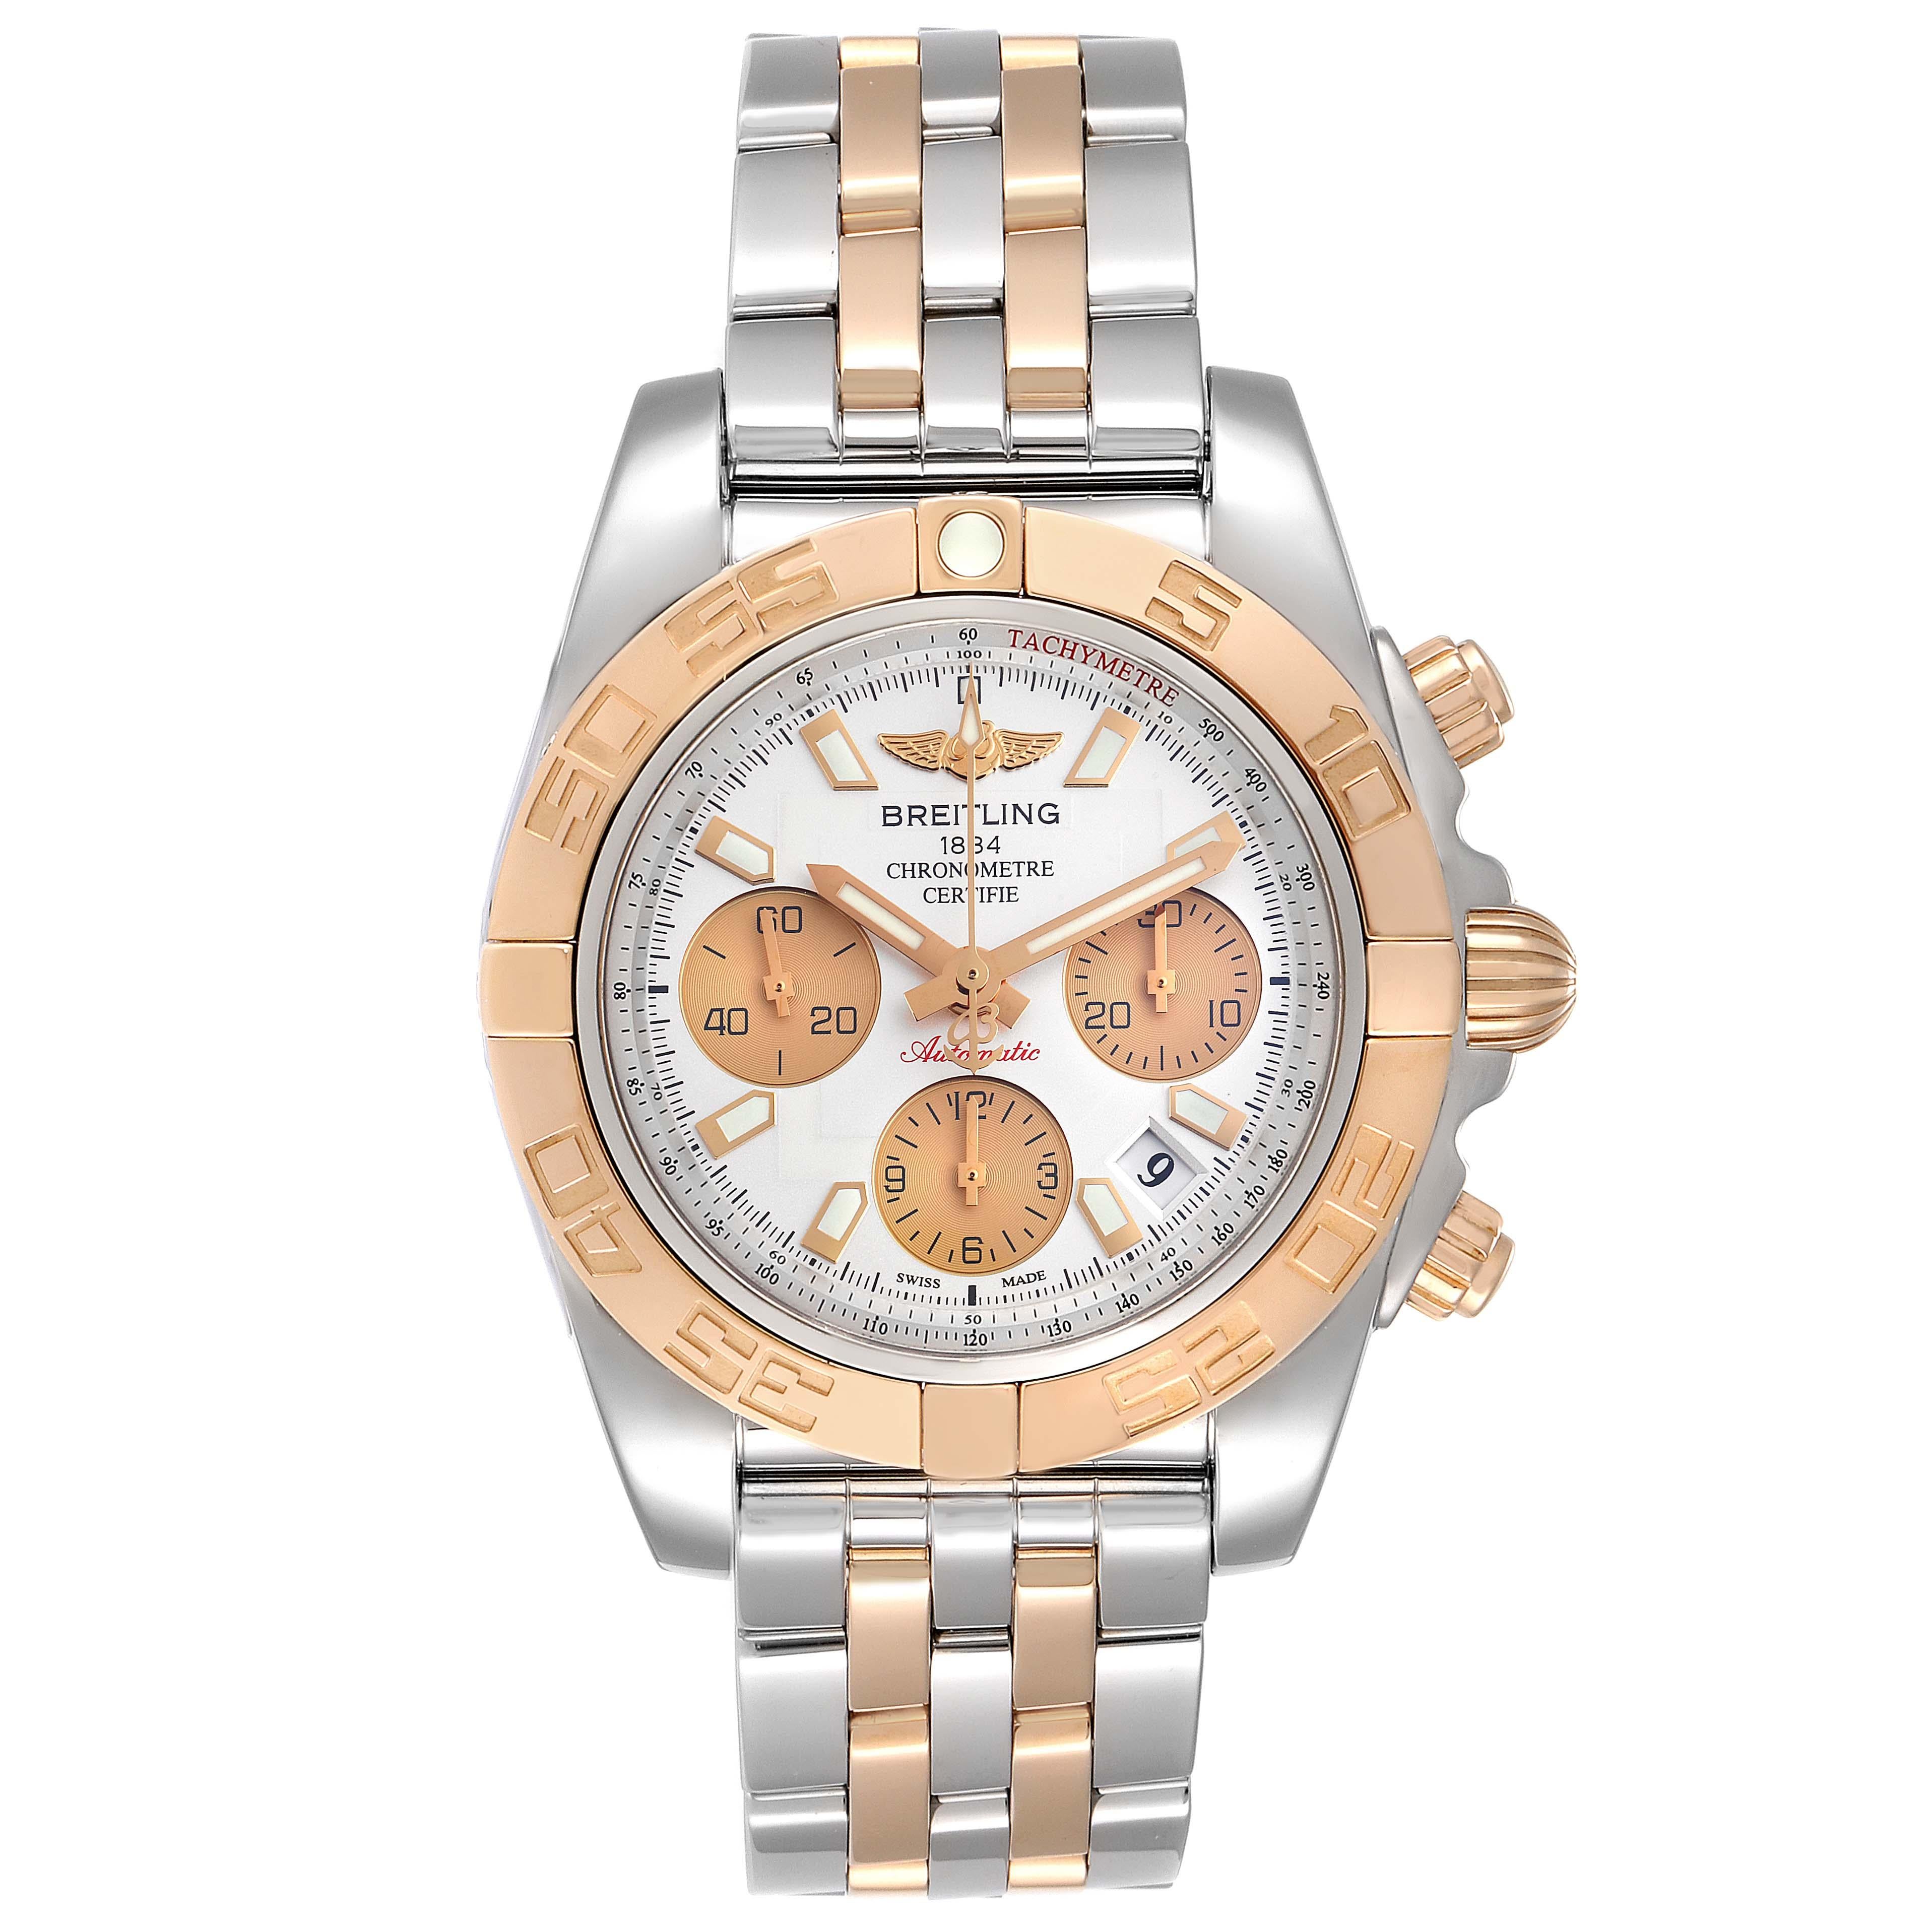 Breitling Chronomat 41 Steel Rose Gold Silver Dial Watch CB0140 Box Papers. Self-winding automatic officially certified chronometer movement. Chronograph function. Stainless steel and 18K rose gold case 41.0 mm in diameter. 18k rose gold crown and